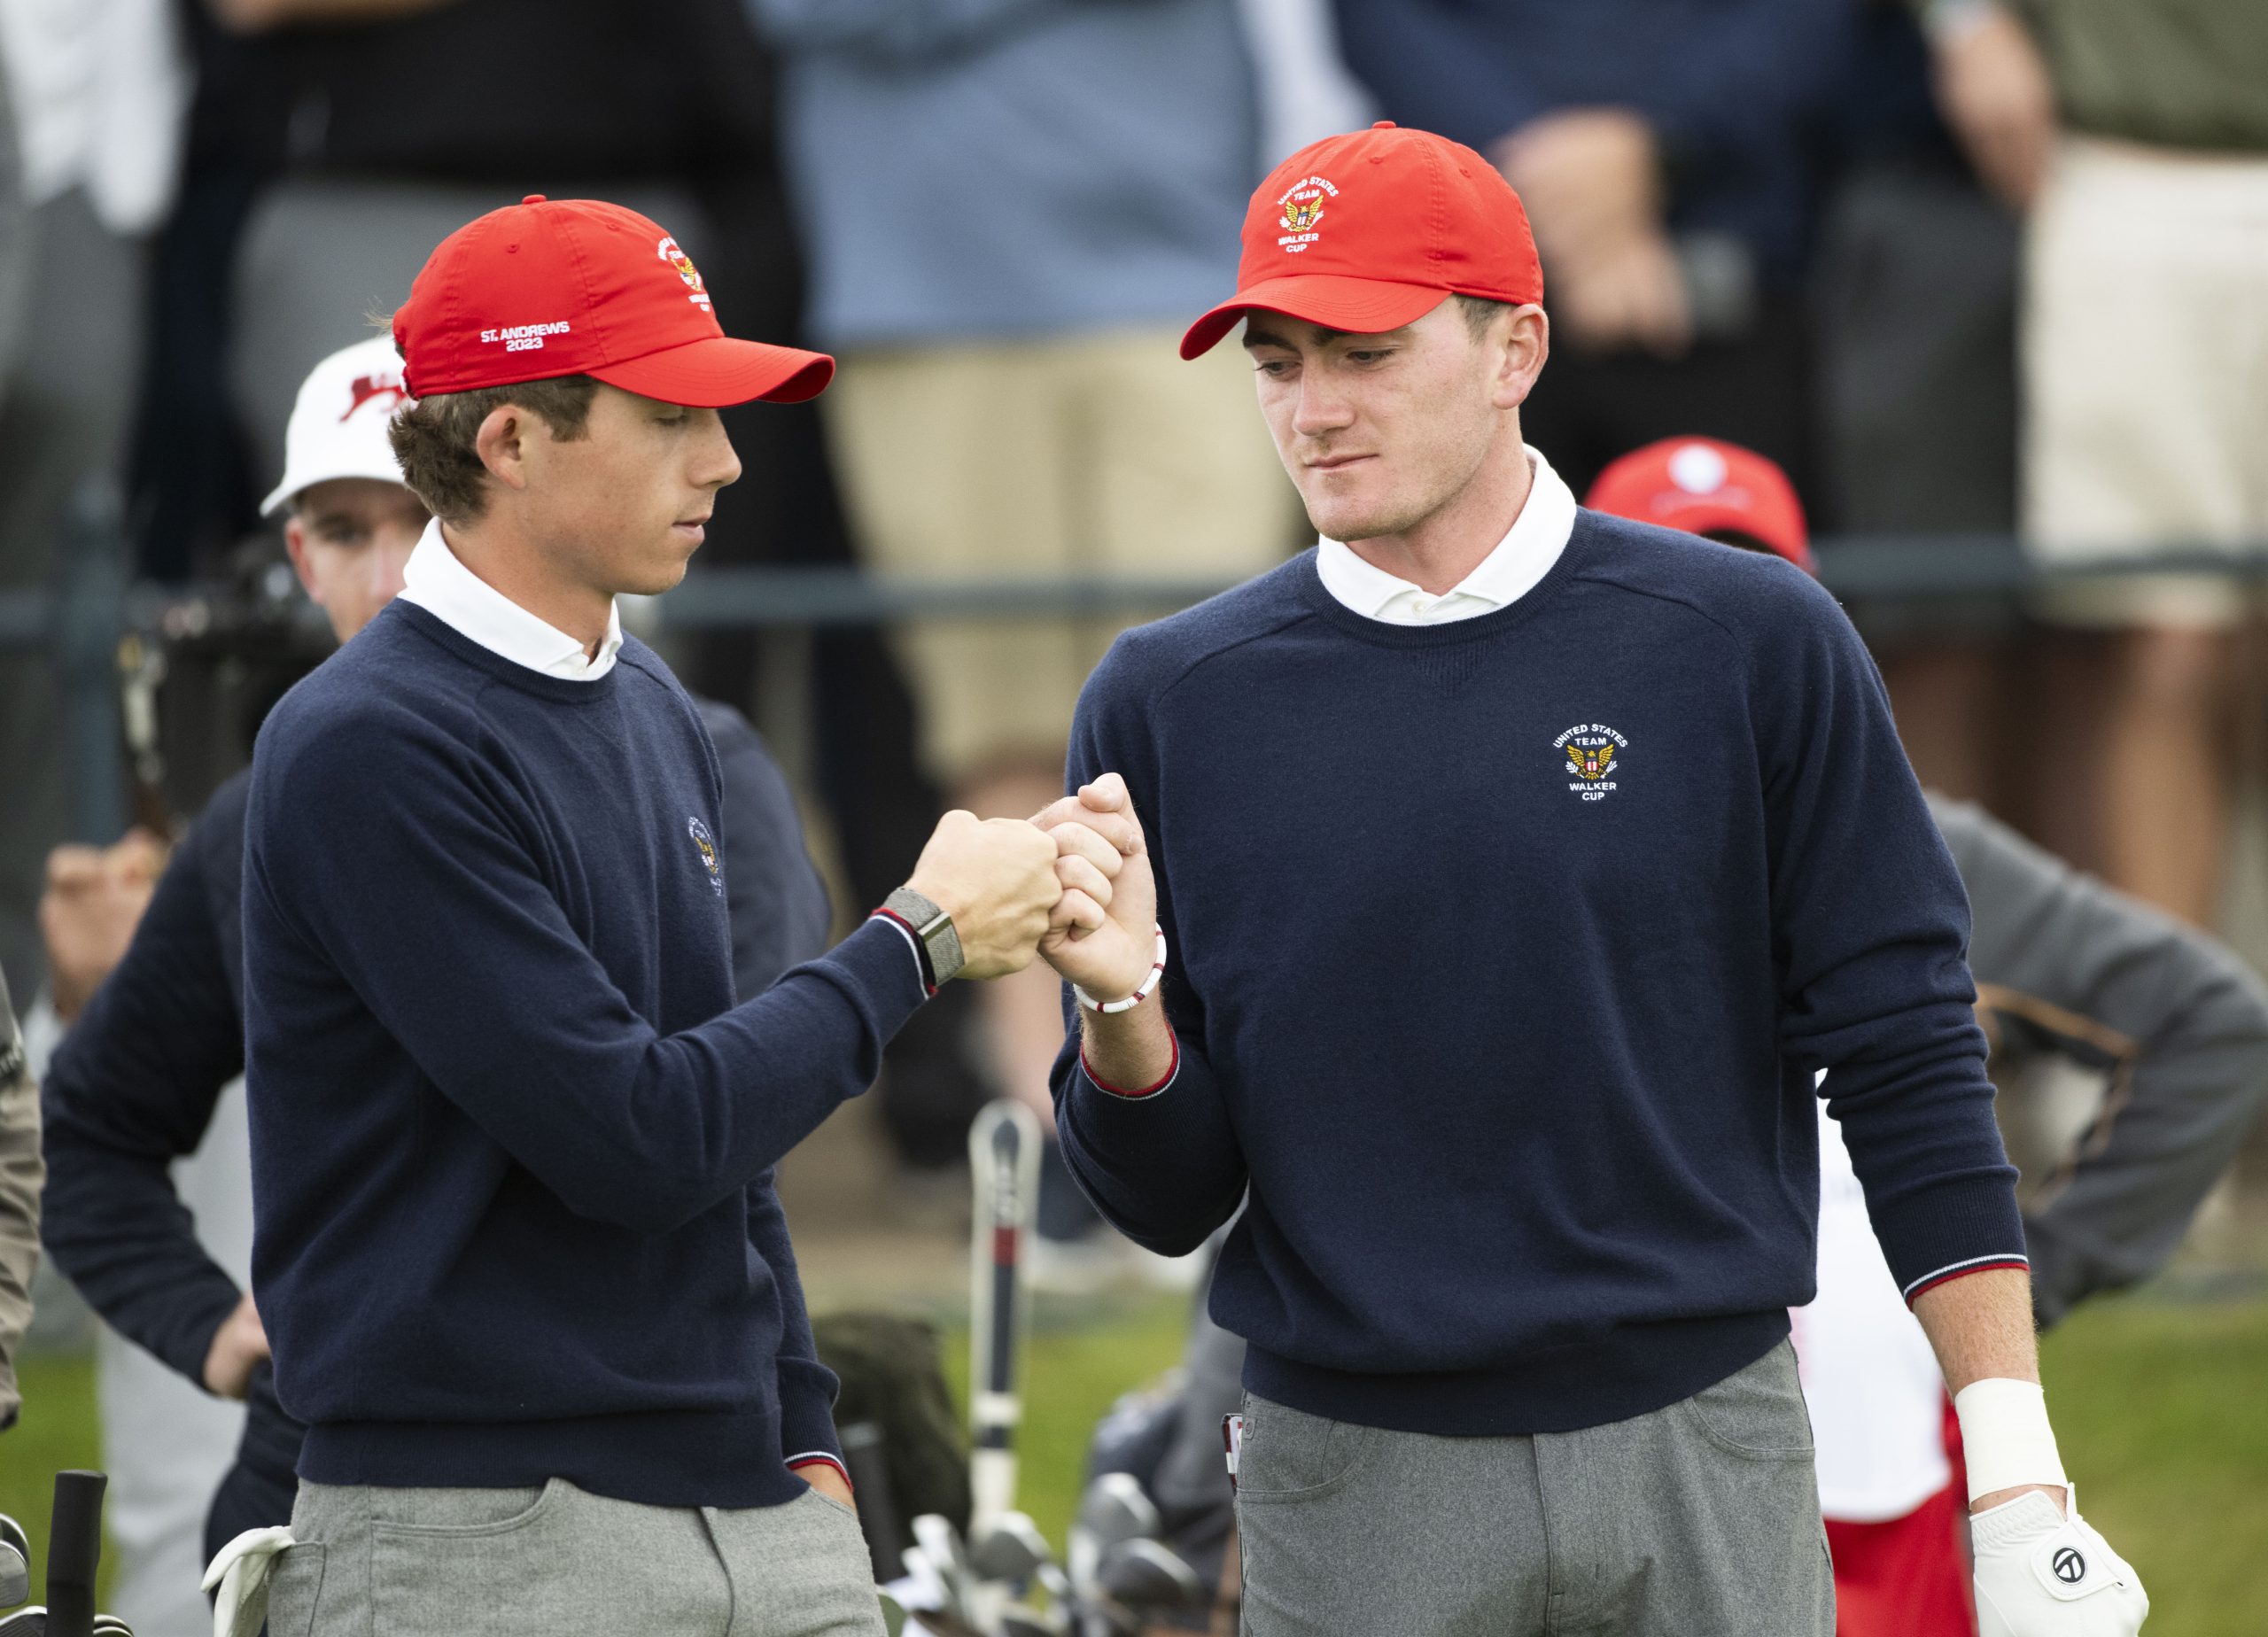 How each player from the United States, Great Britain and Ireland fared at the 2023 Walker Cup